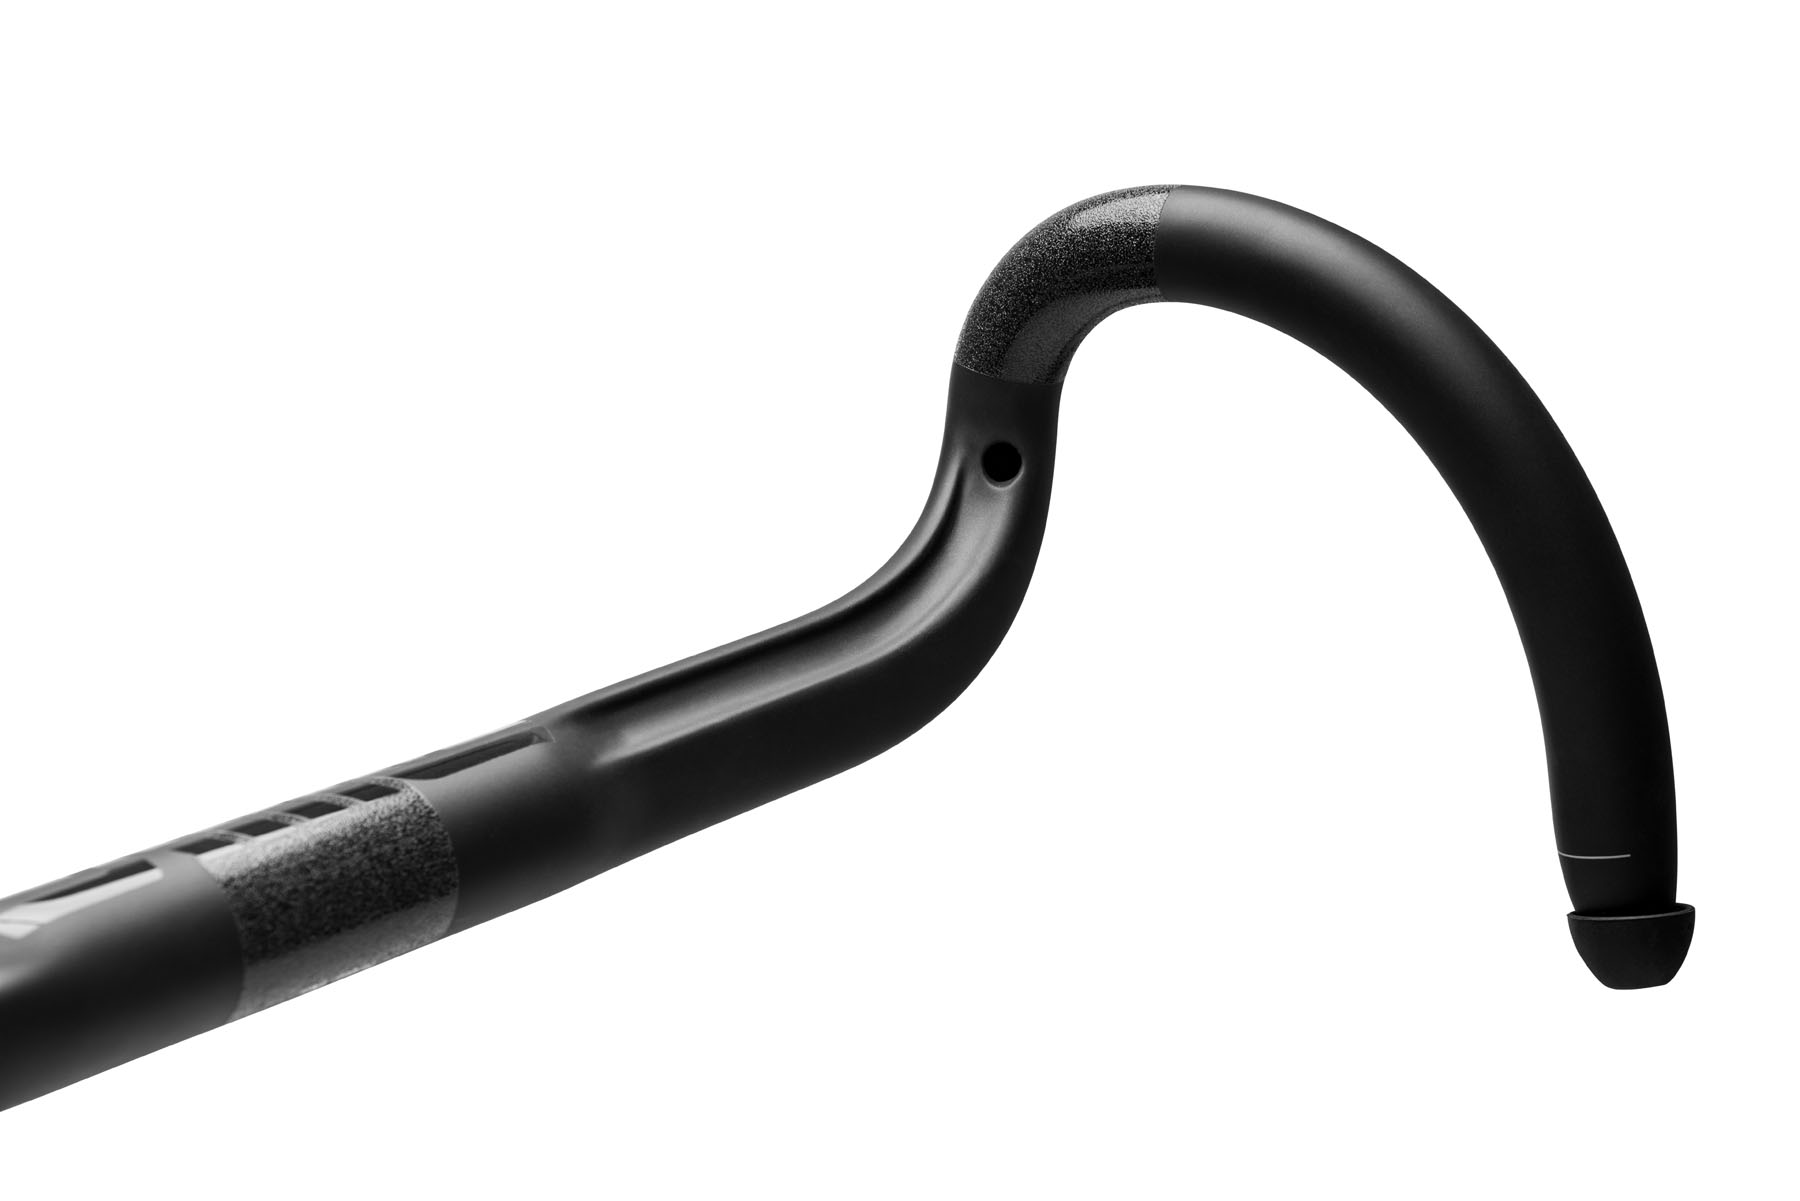 ENVE Compact Road Handlebars get reprogrammed for internal electric wiring & more